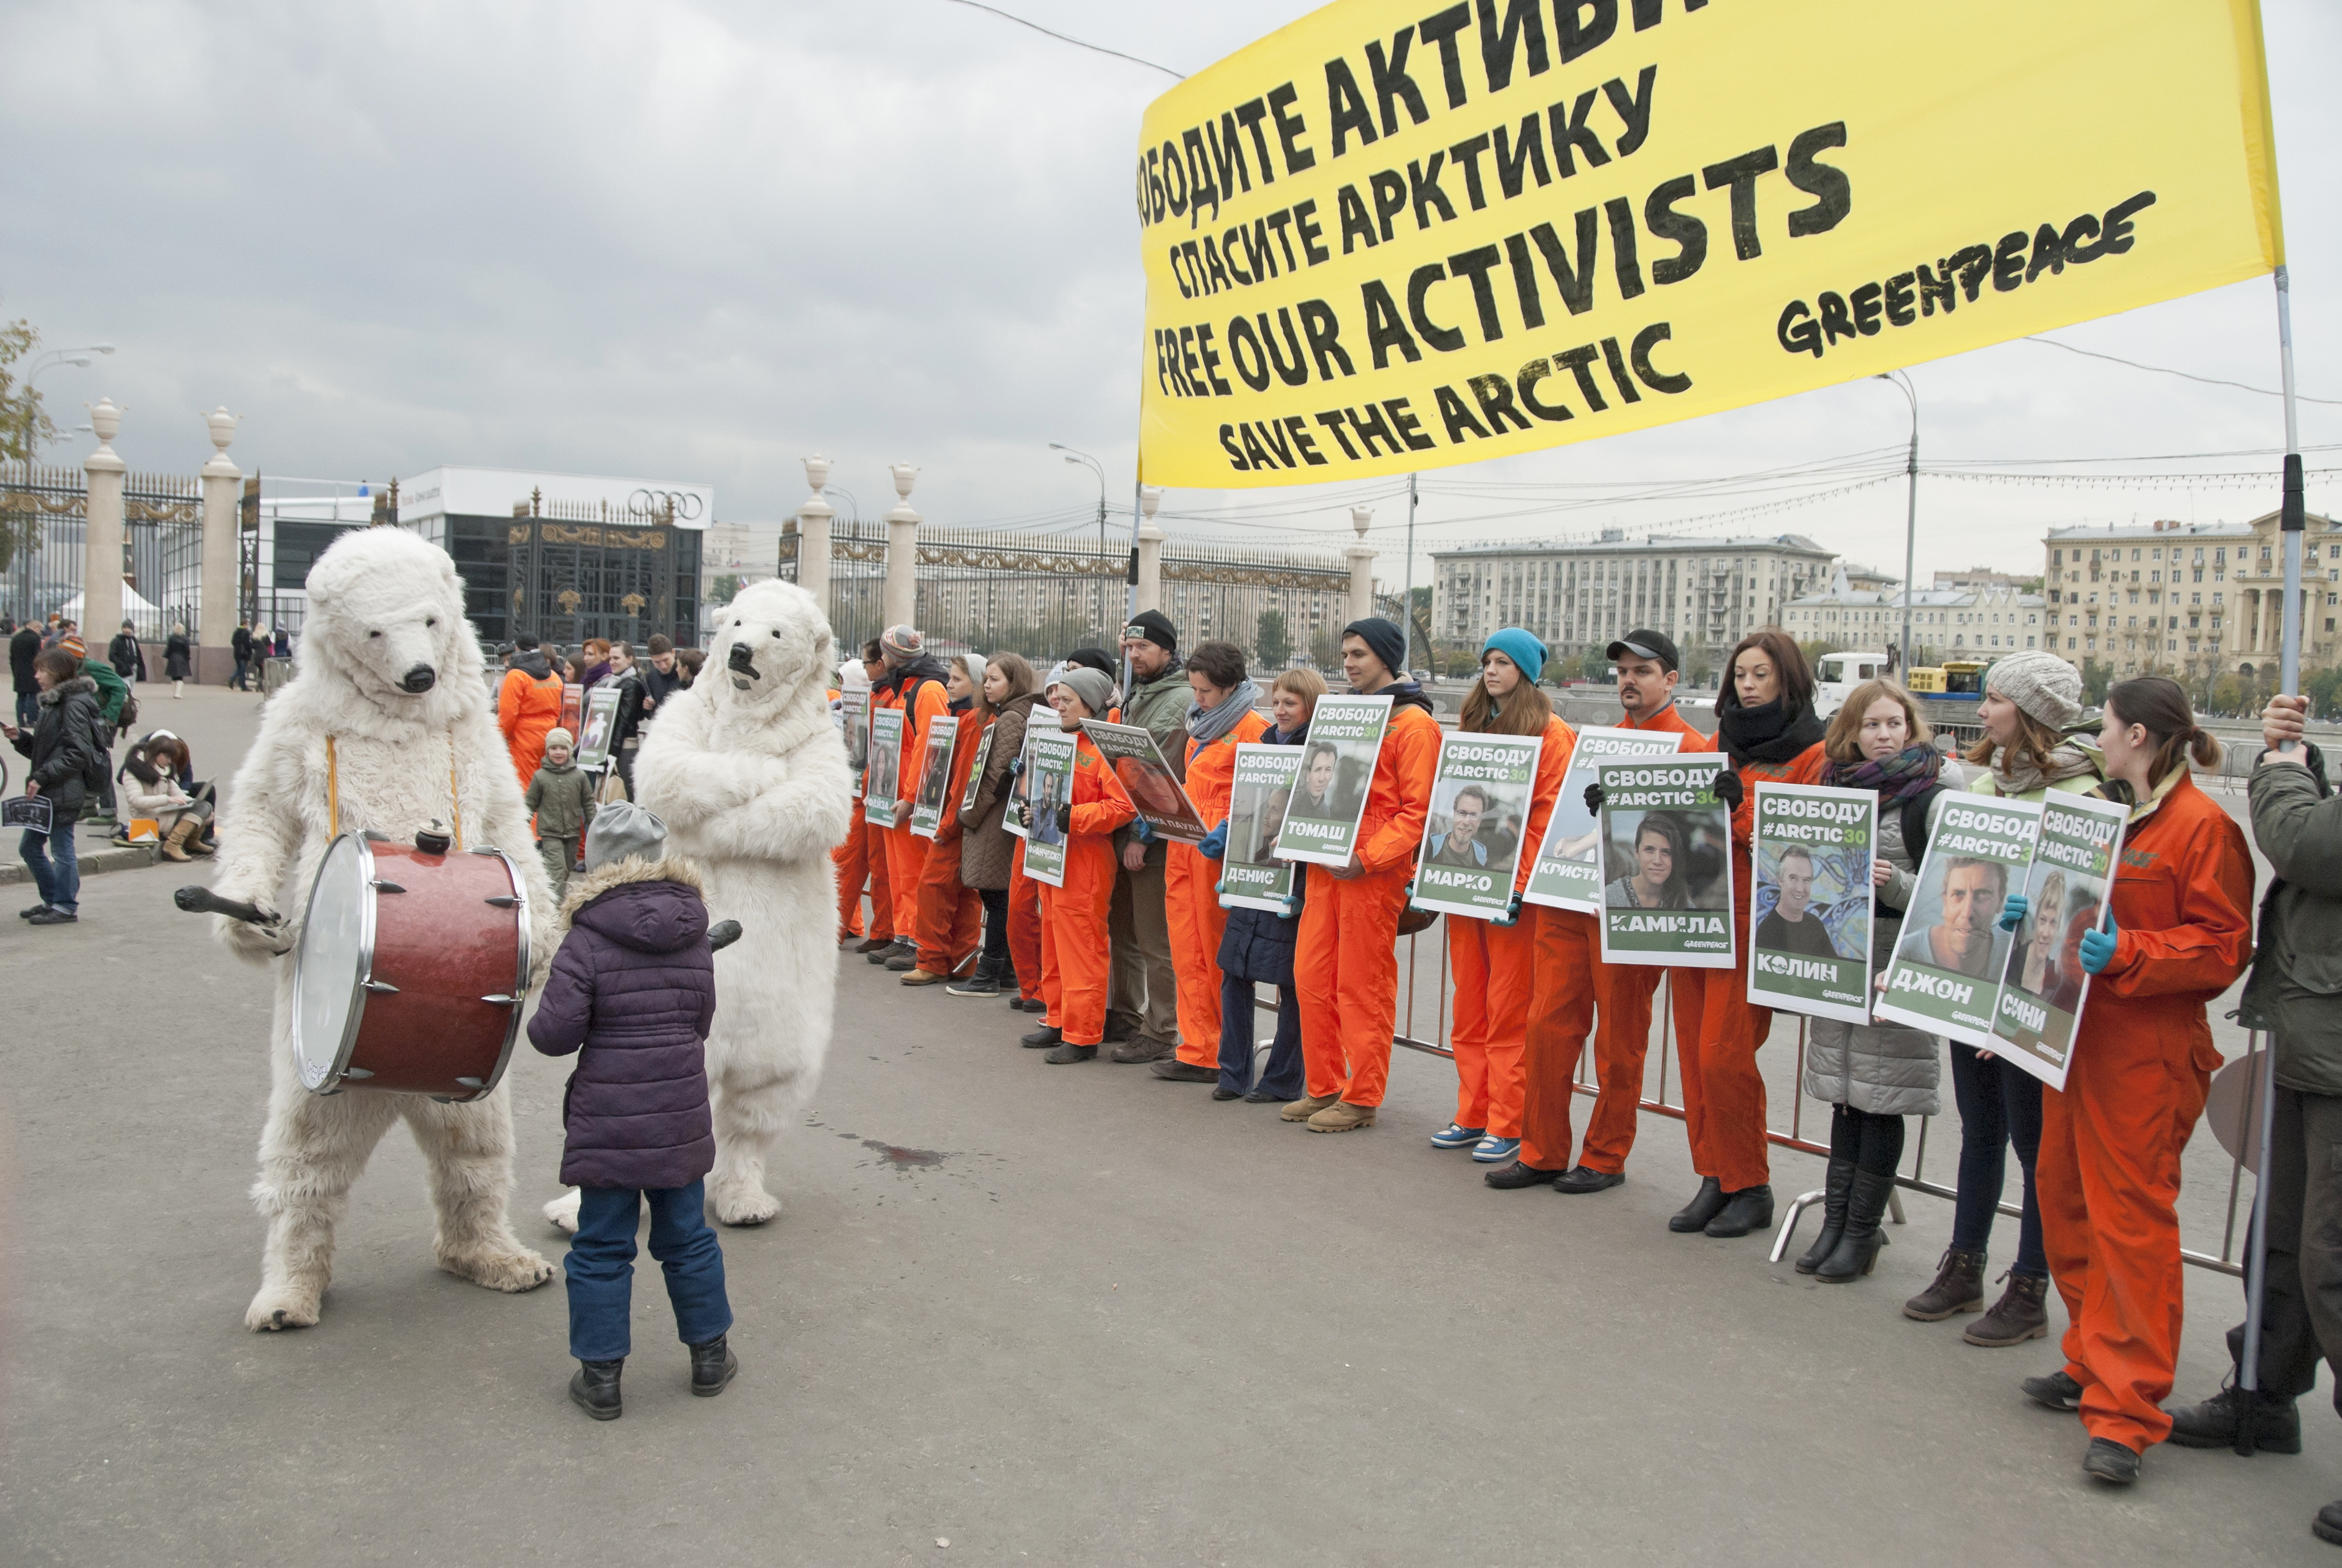 Protesters take part at the meeting in support of 30 Greenpeace activists charged with piracy at an oil platform in the Arctic, October 5, 2013 in Moscow, Russia. (Getty)